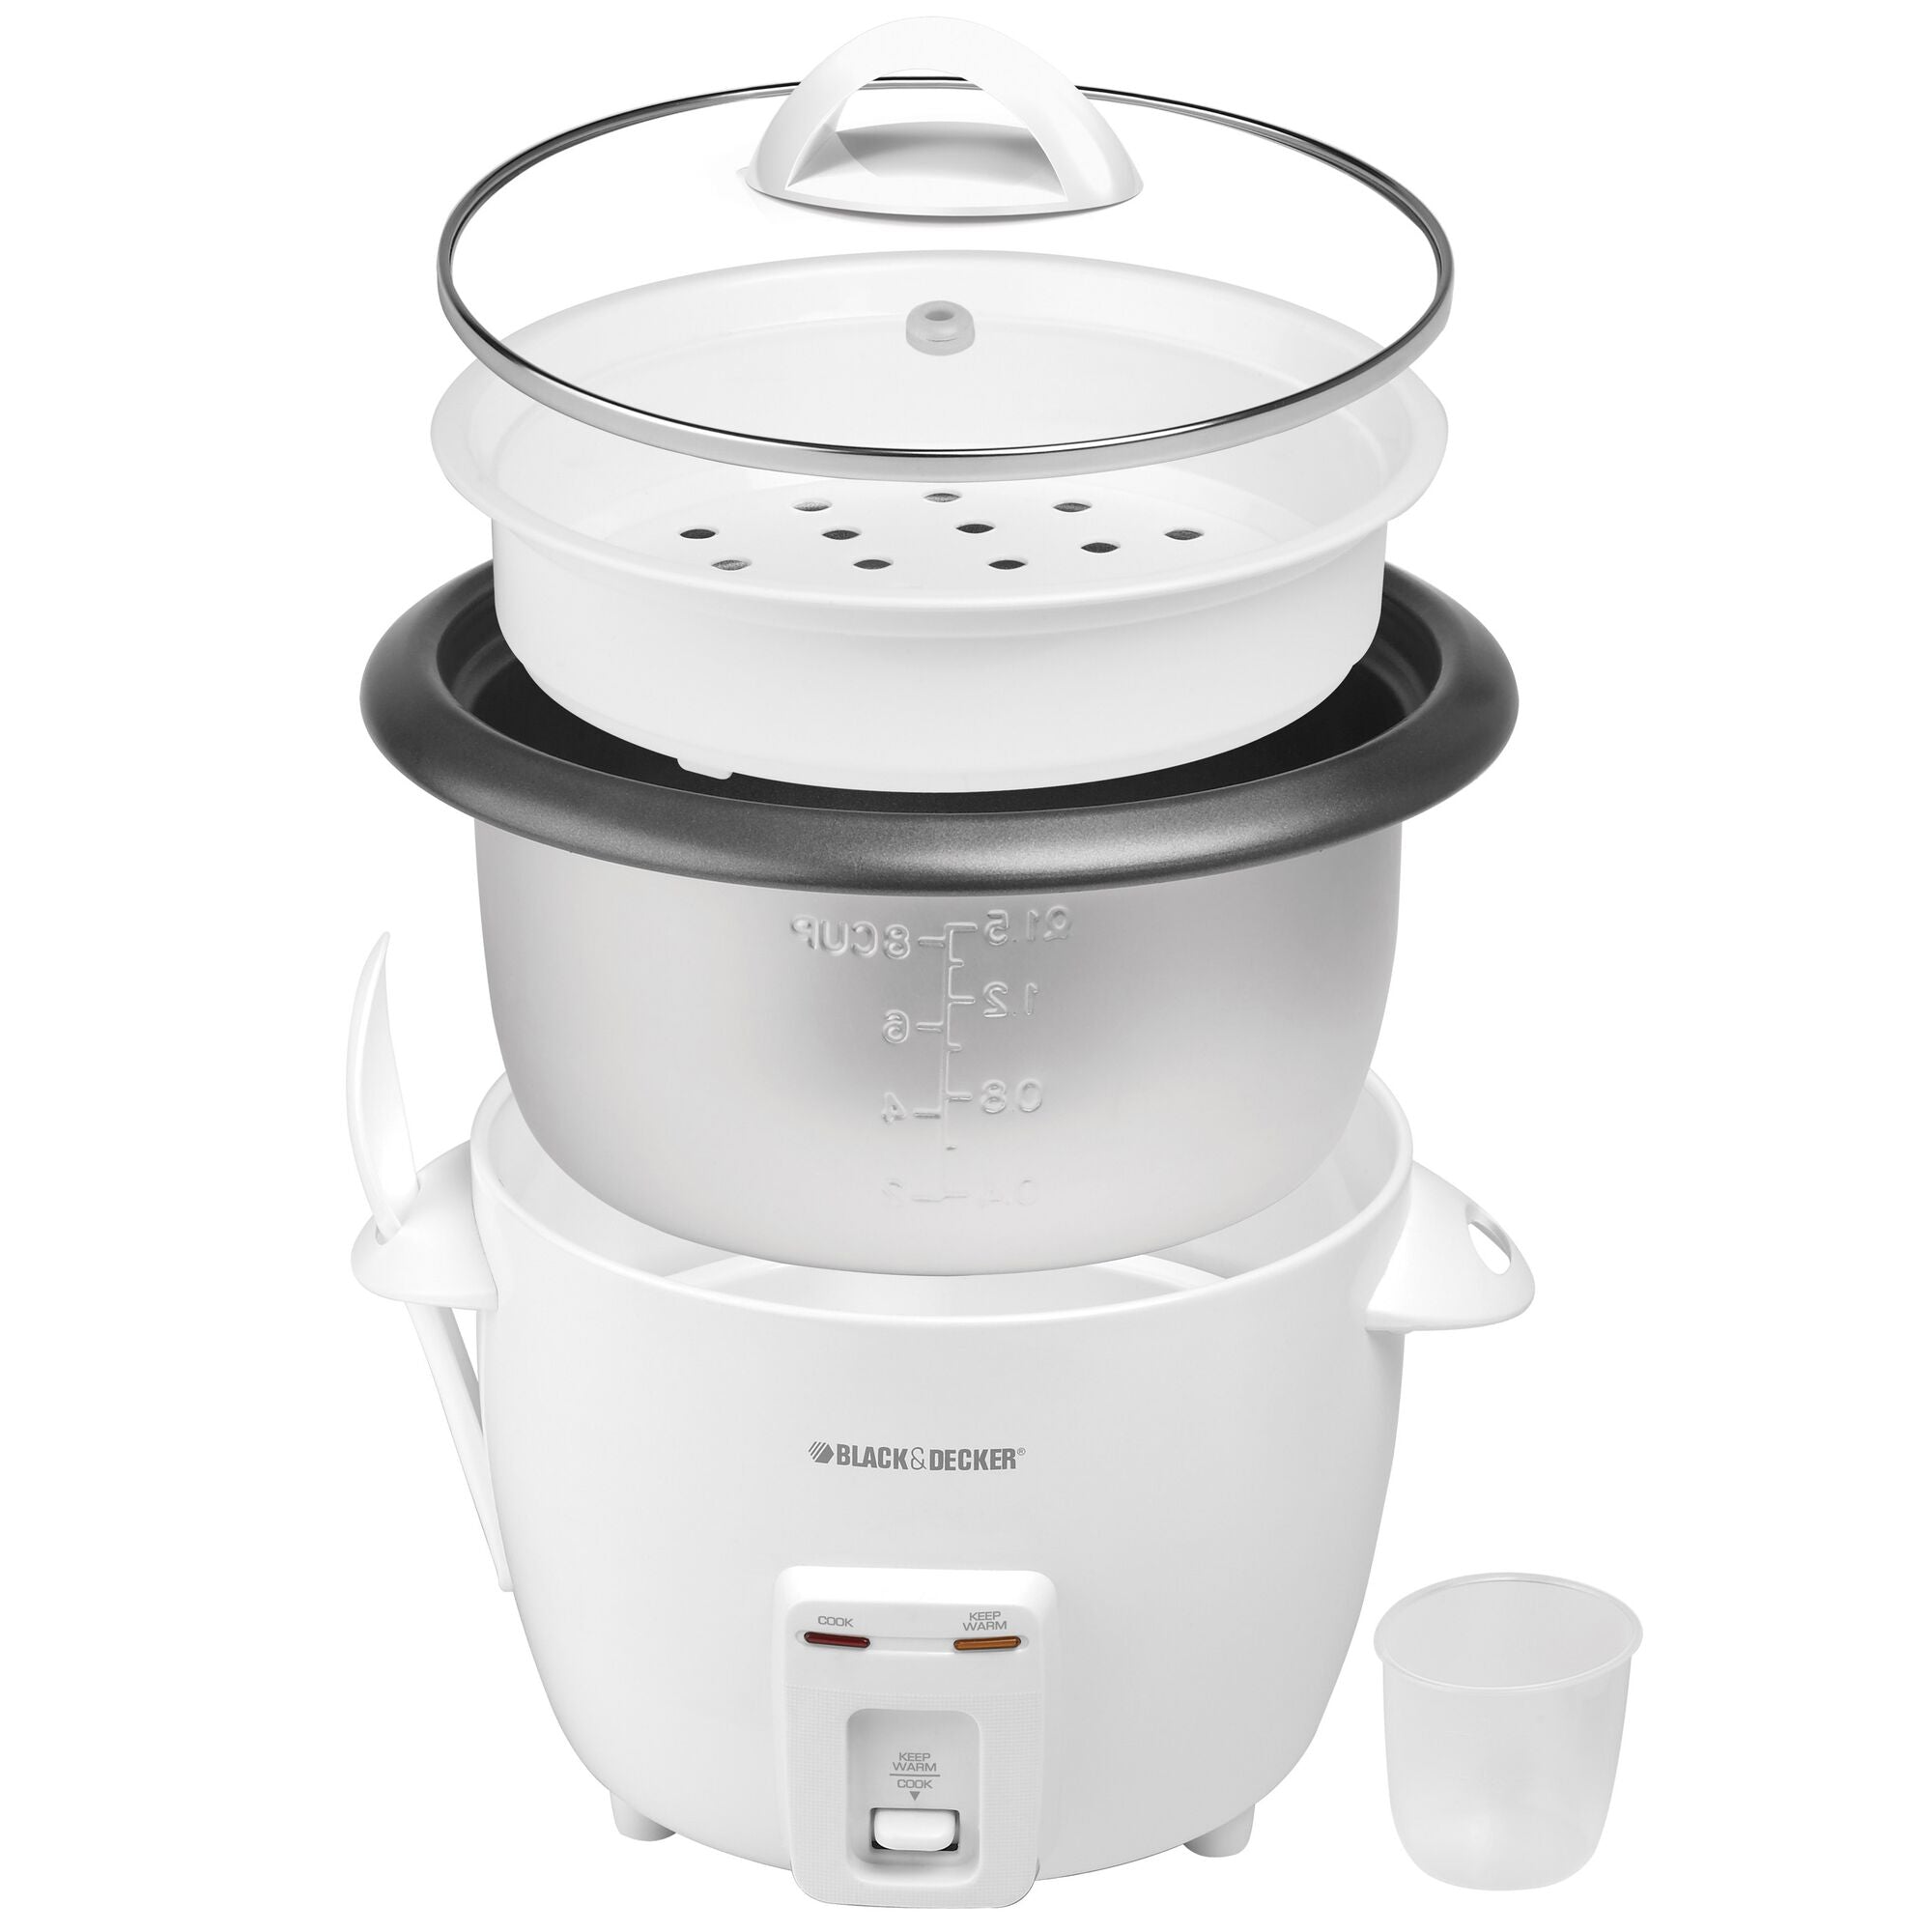 Black & Decker 6-Cup Rice Cooker with Steaming Basket, White/Black